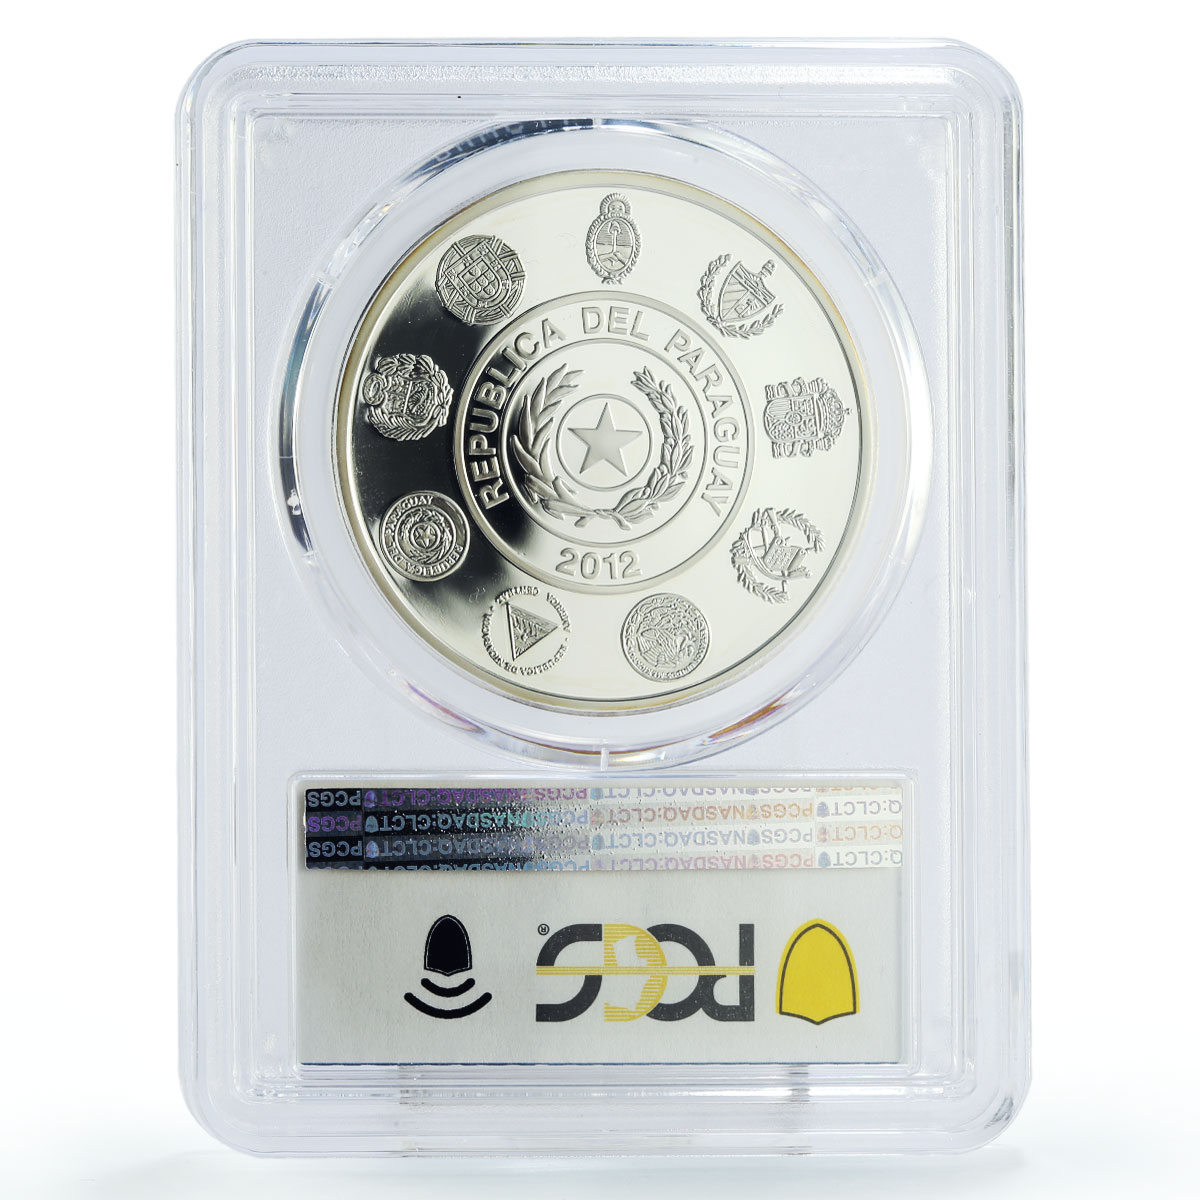 Paraguay 1 guarani Encounter of Two Worlds Sunflower PR70 PCGS silver coin 2012